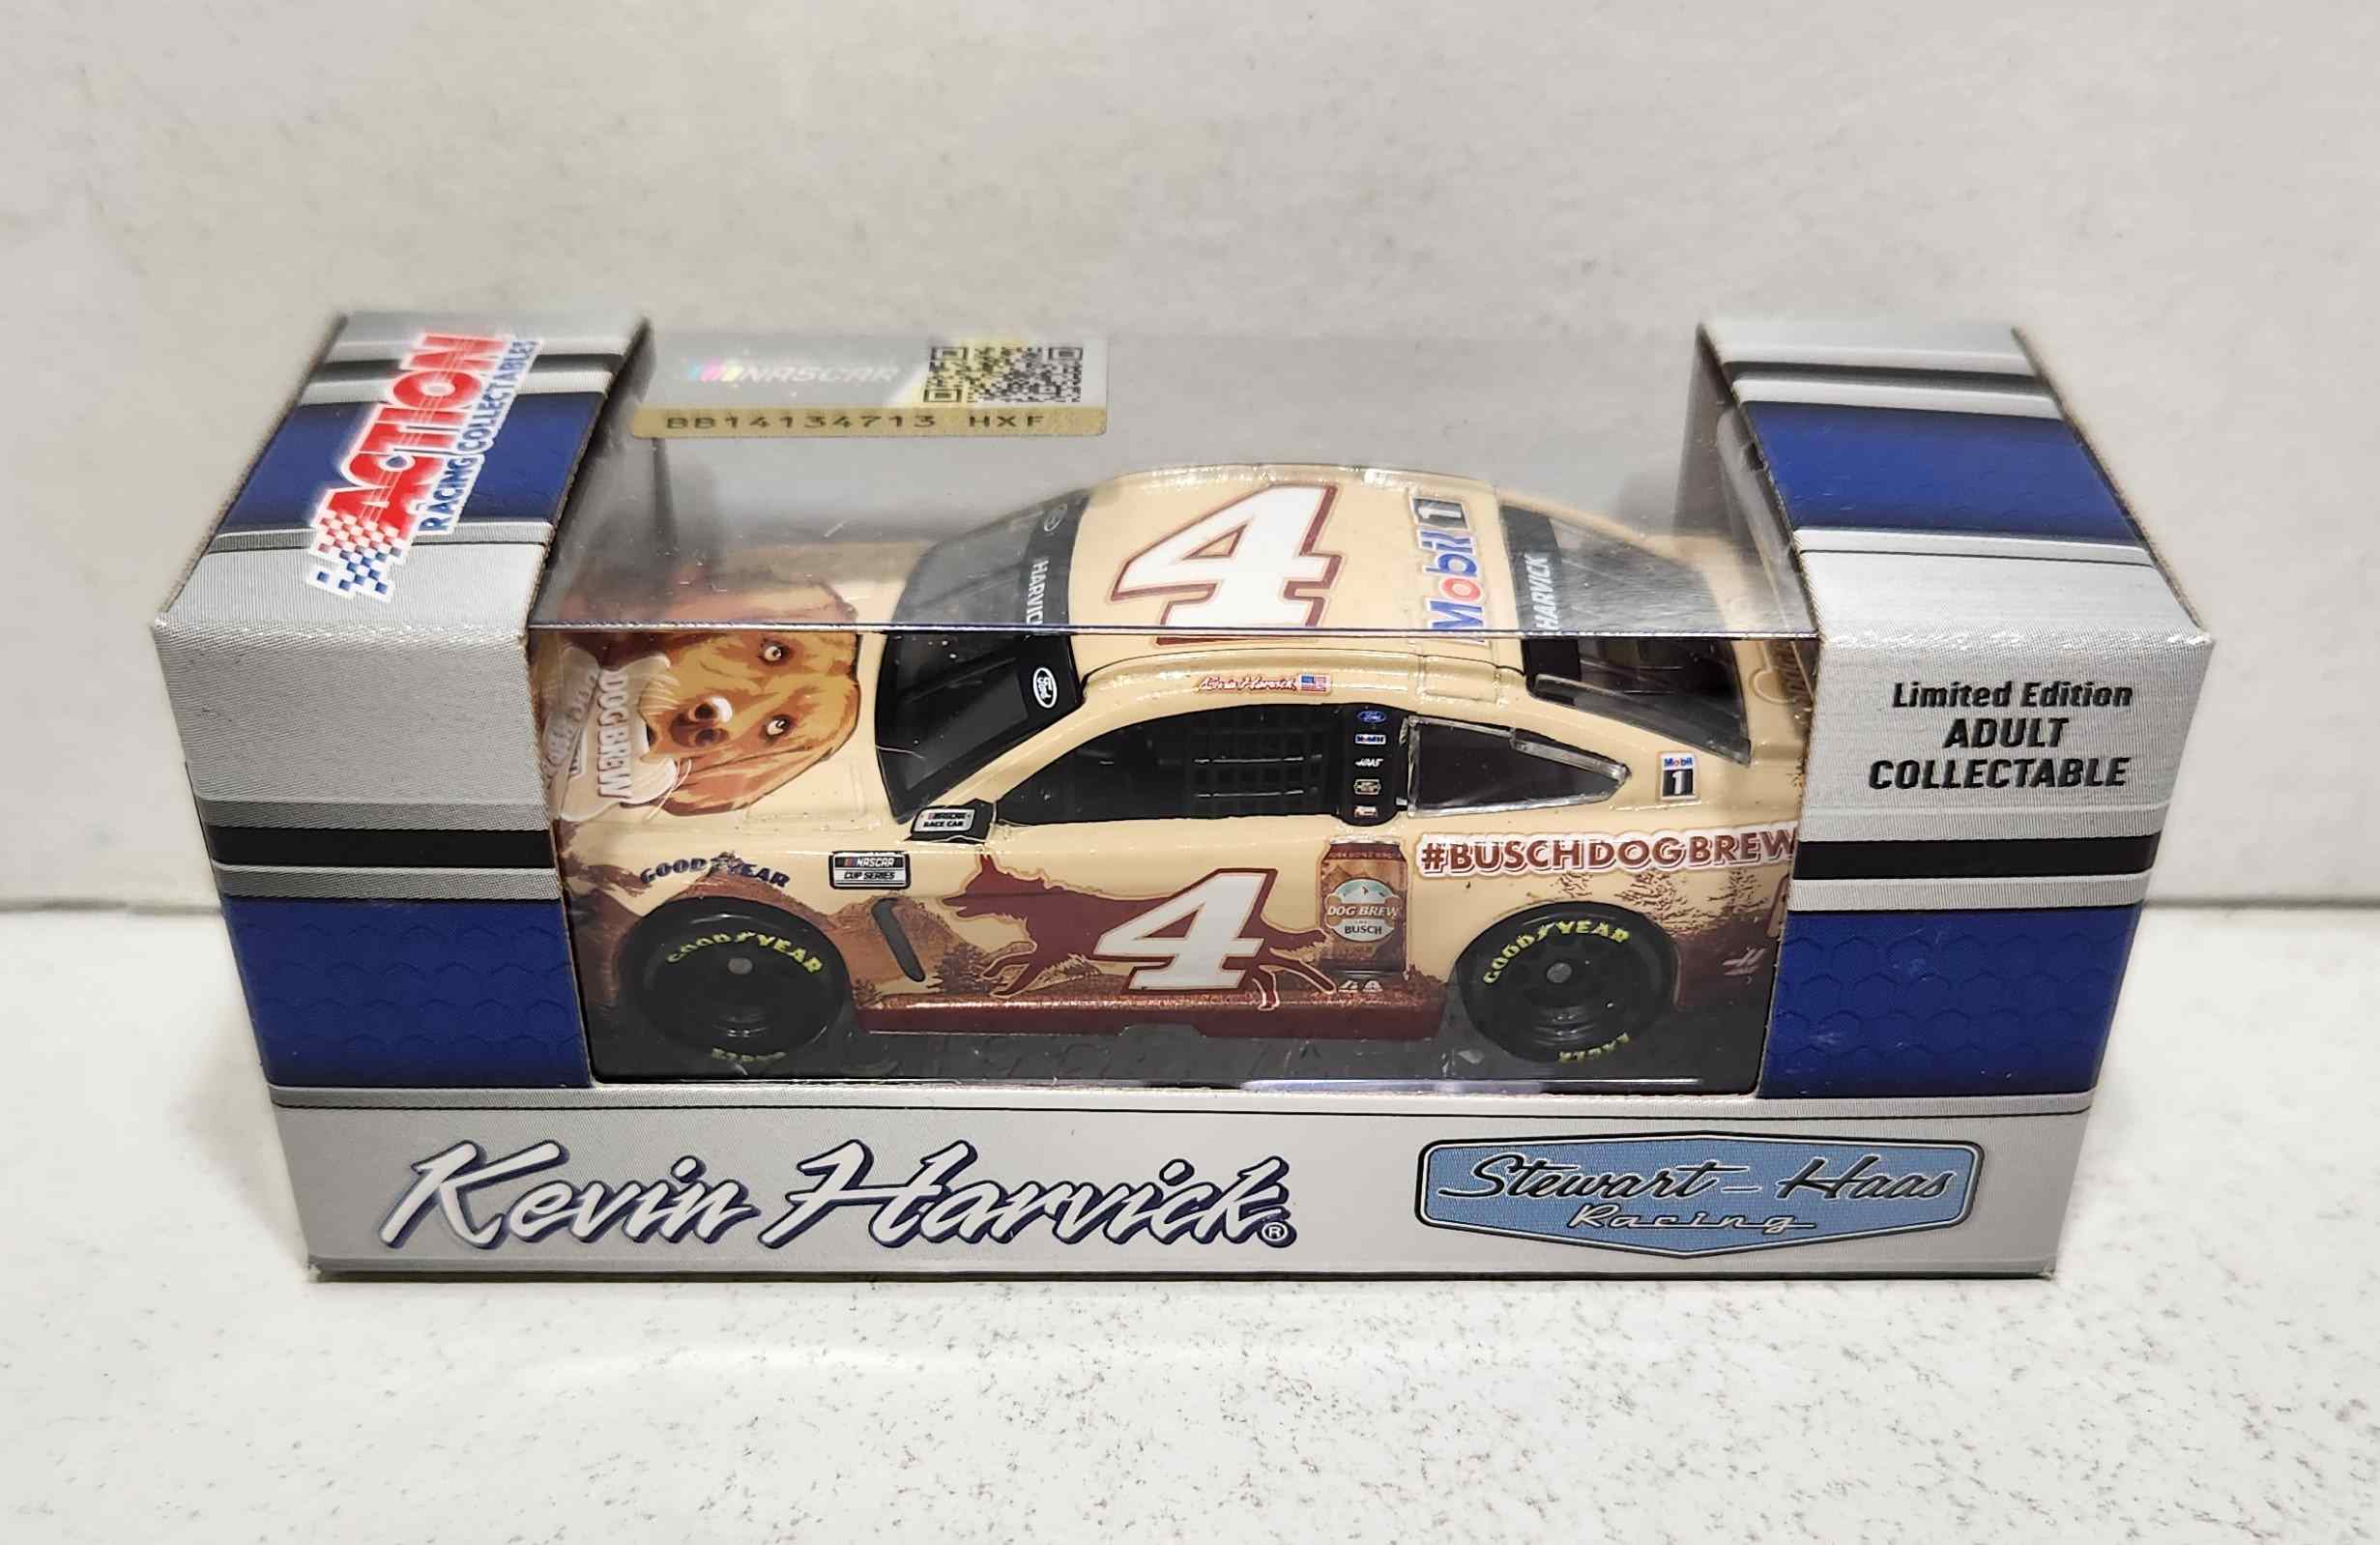 2021 Kevin Harvick 1/64th Busch "Dog Brew" Mustang